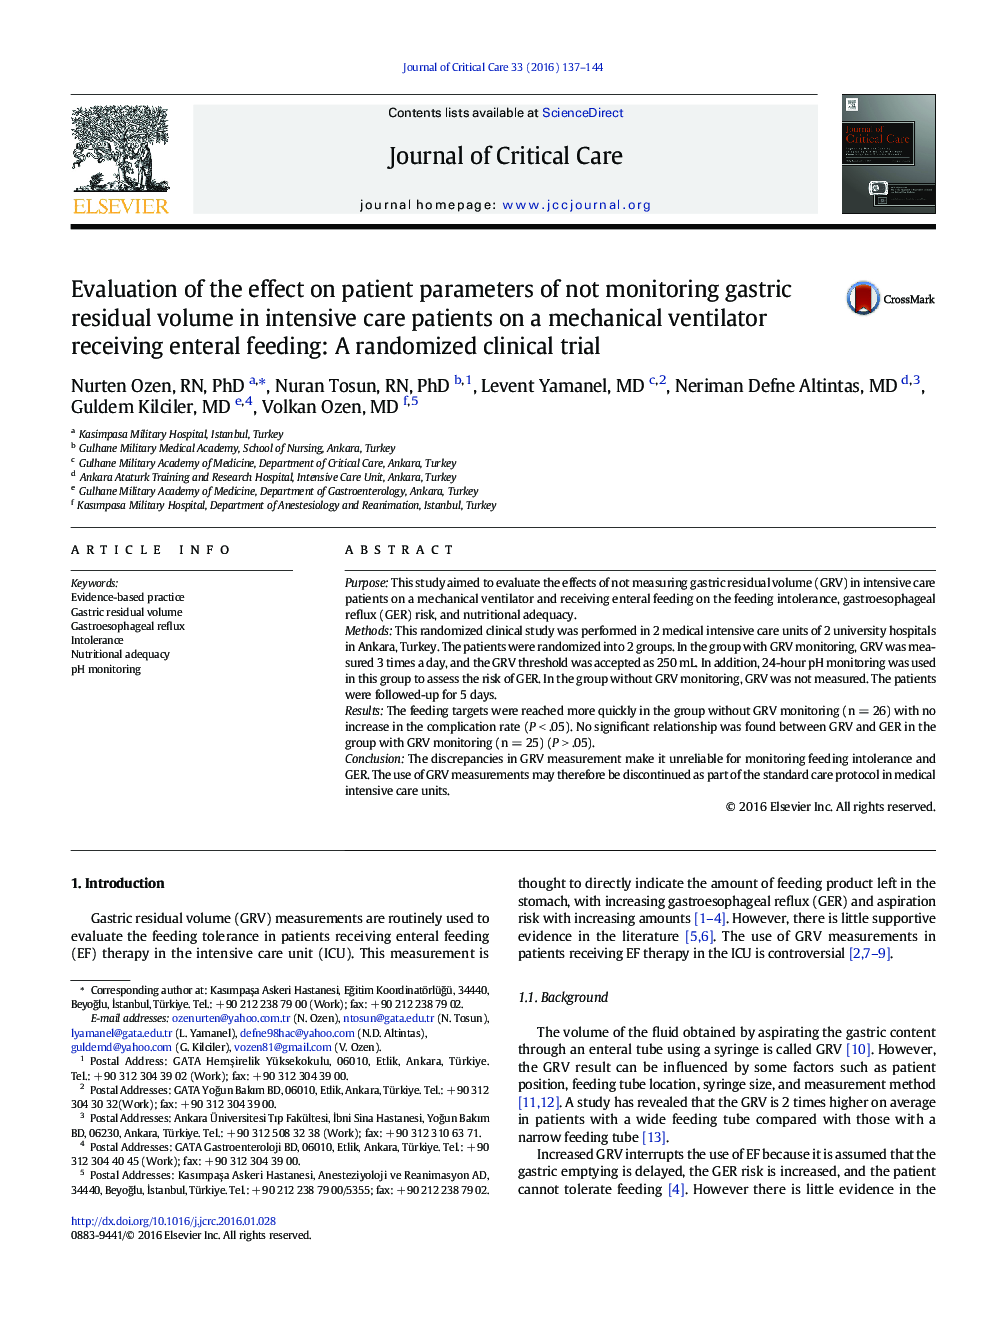 Evaluation of the effect on patient parameters of not monitoring gastric residual volume in intensive care patients on a mechanical ventilator receiving enteral feeding: A randomized clinical trial